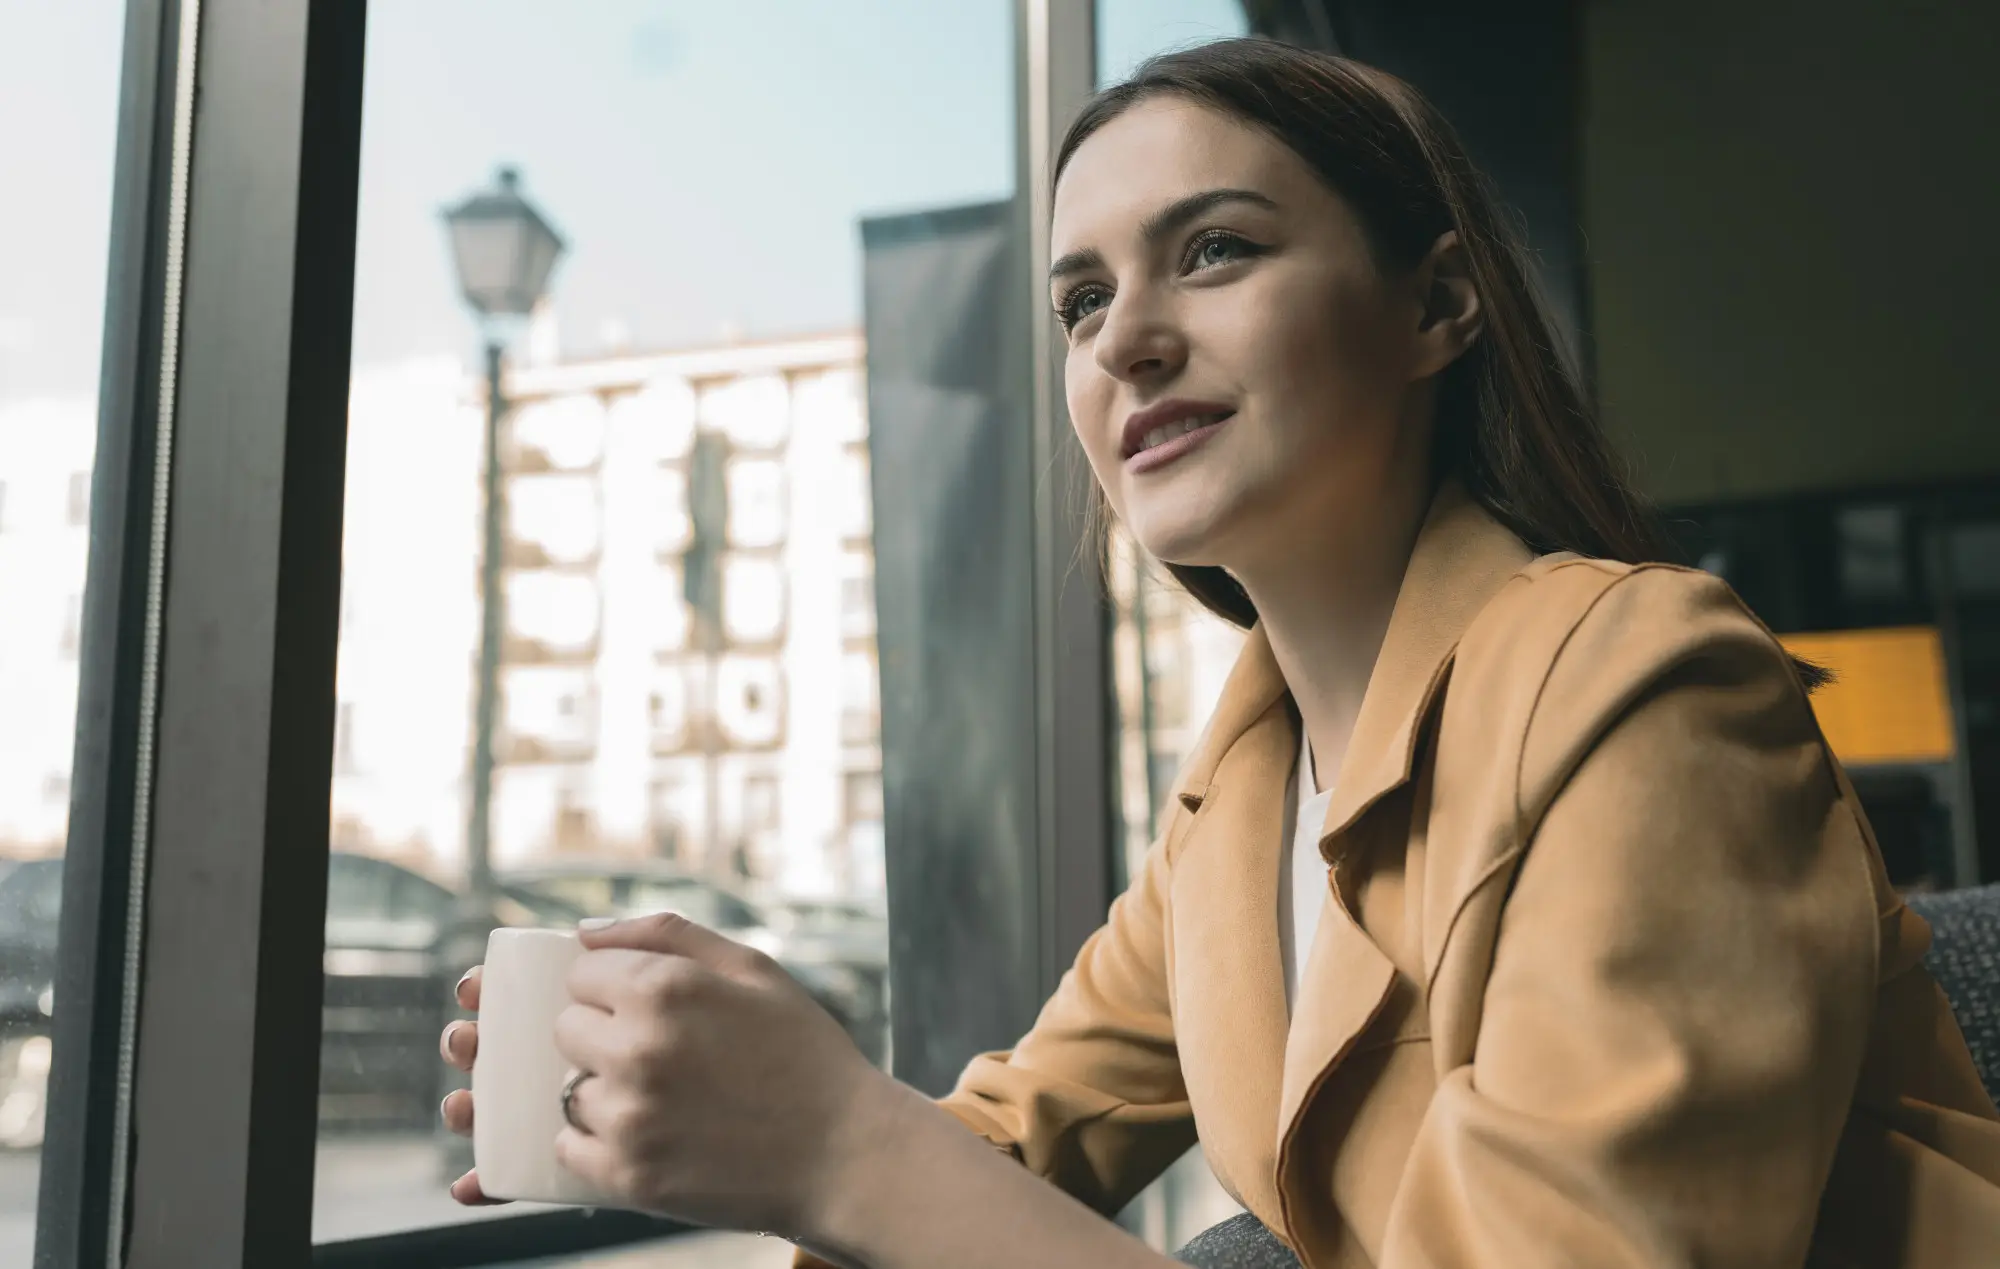 woman with suit jacket holding a mug sitting by a window